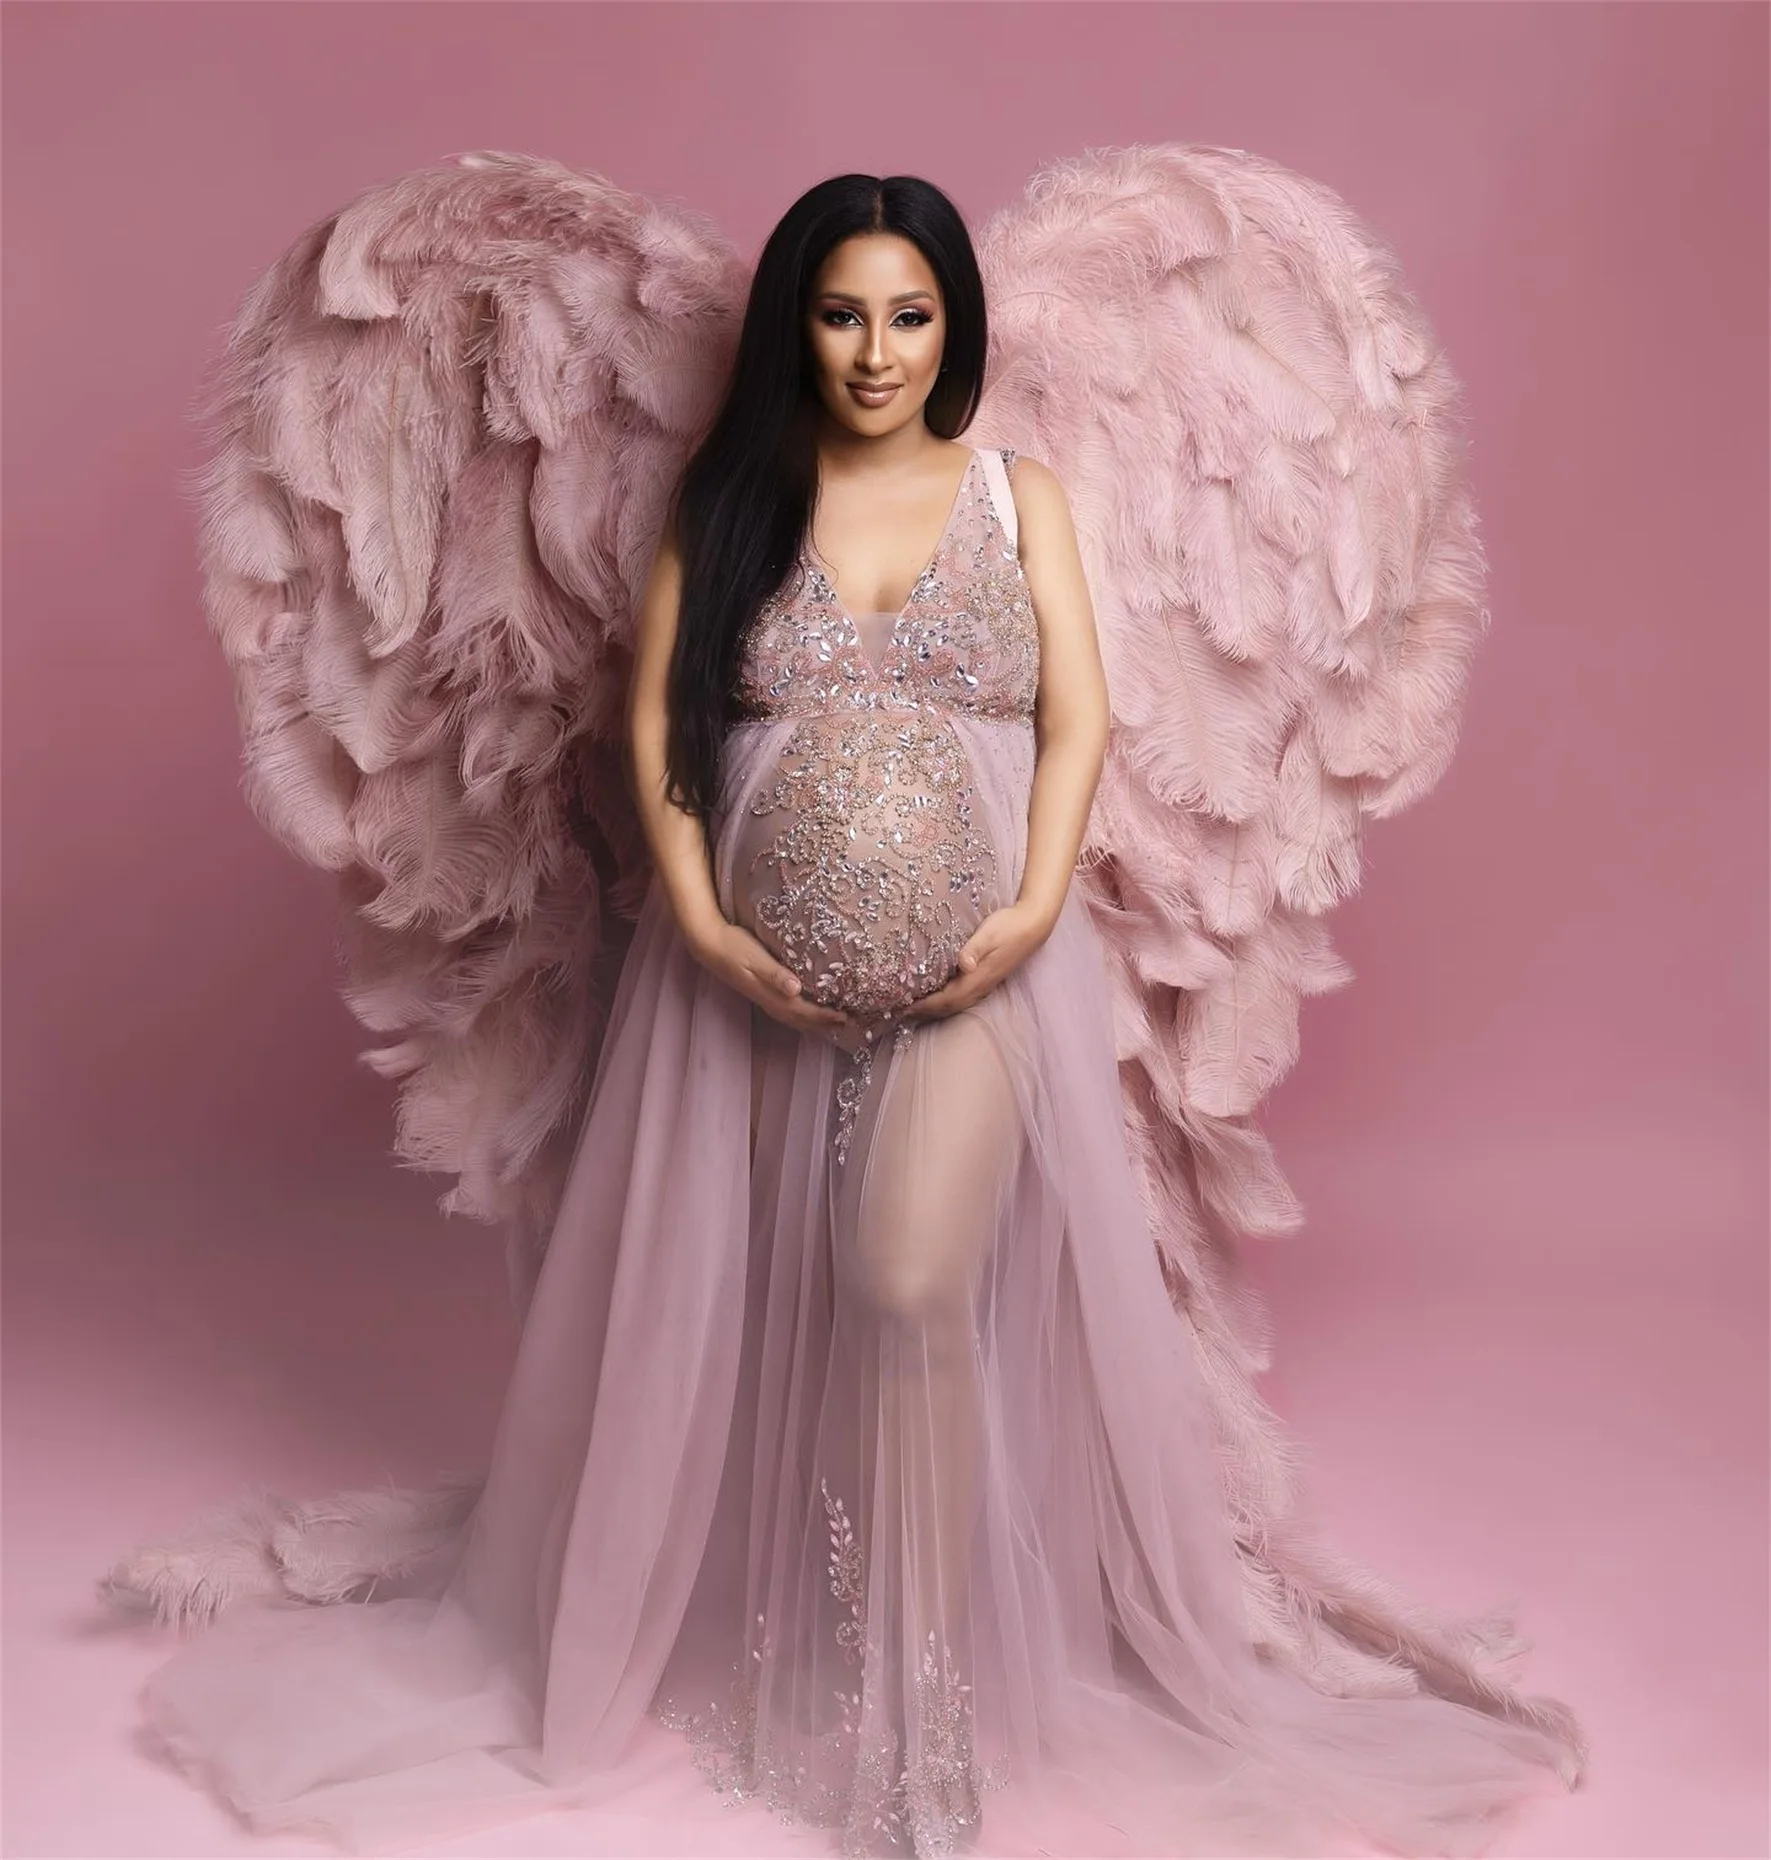 

Sexy Maternity Photoshoot Dresses Deep V Neck Lace Beaded Tulle Pregnant Women Gowns for Babyshower Wedding Party Prom Bathrobe